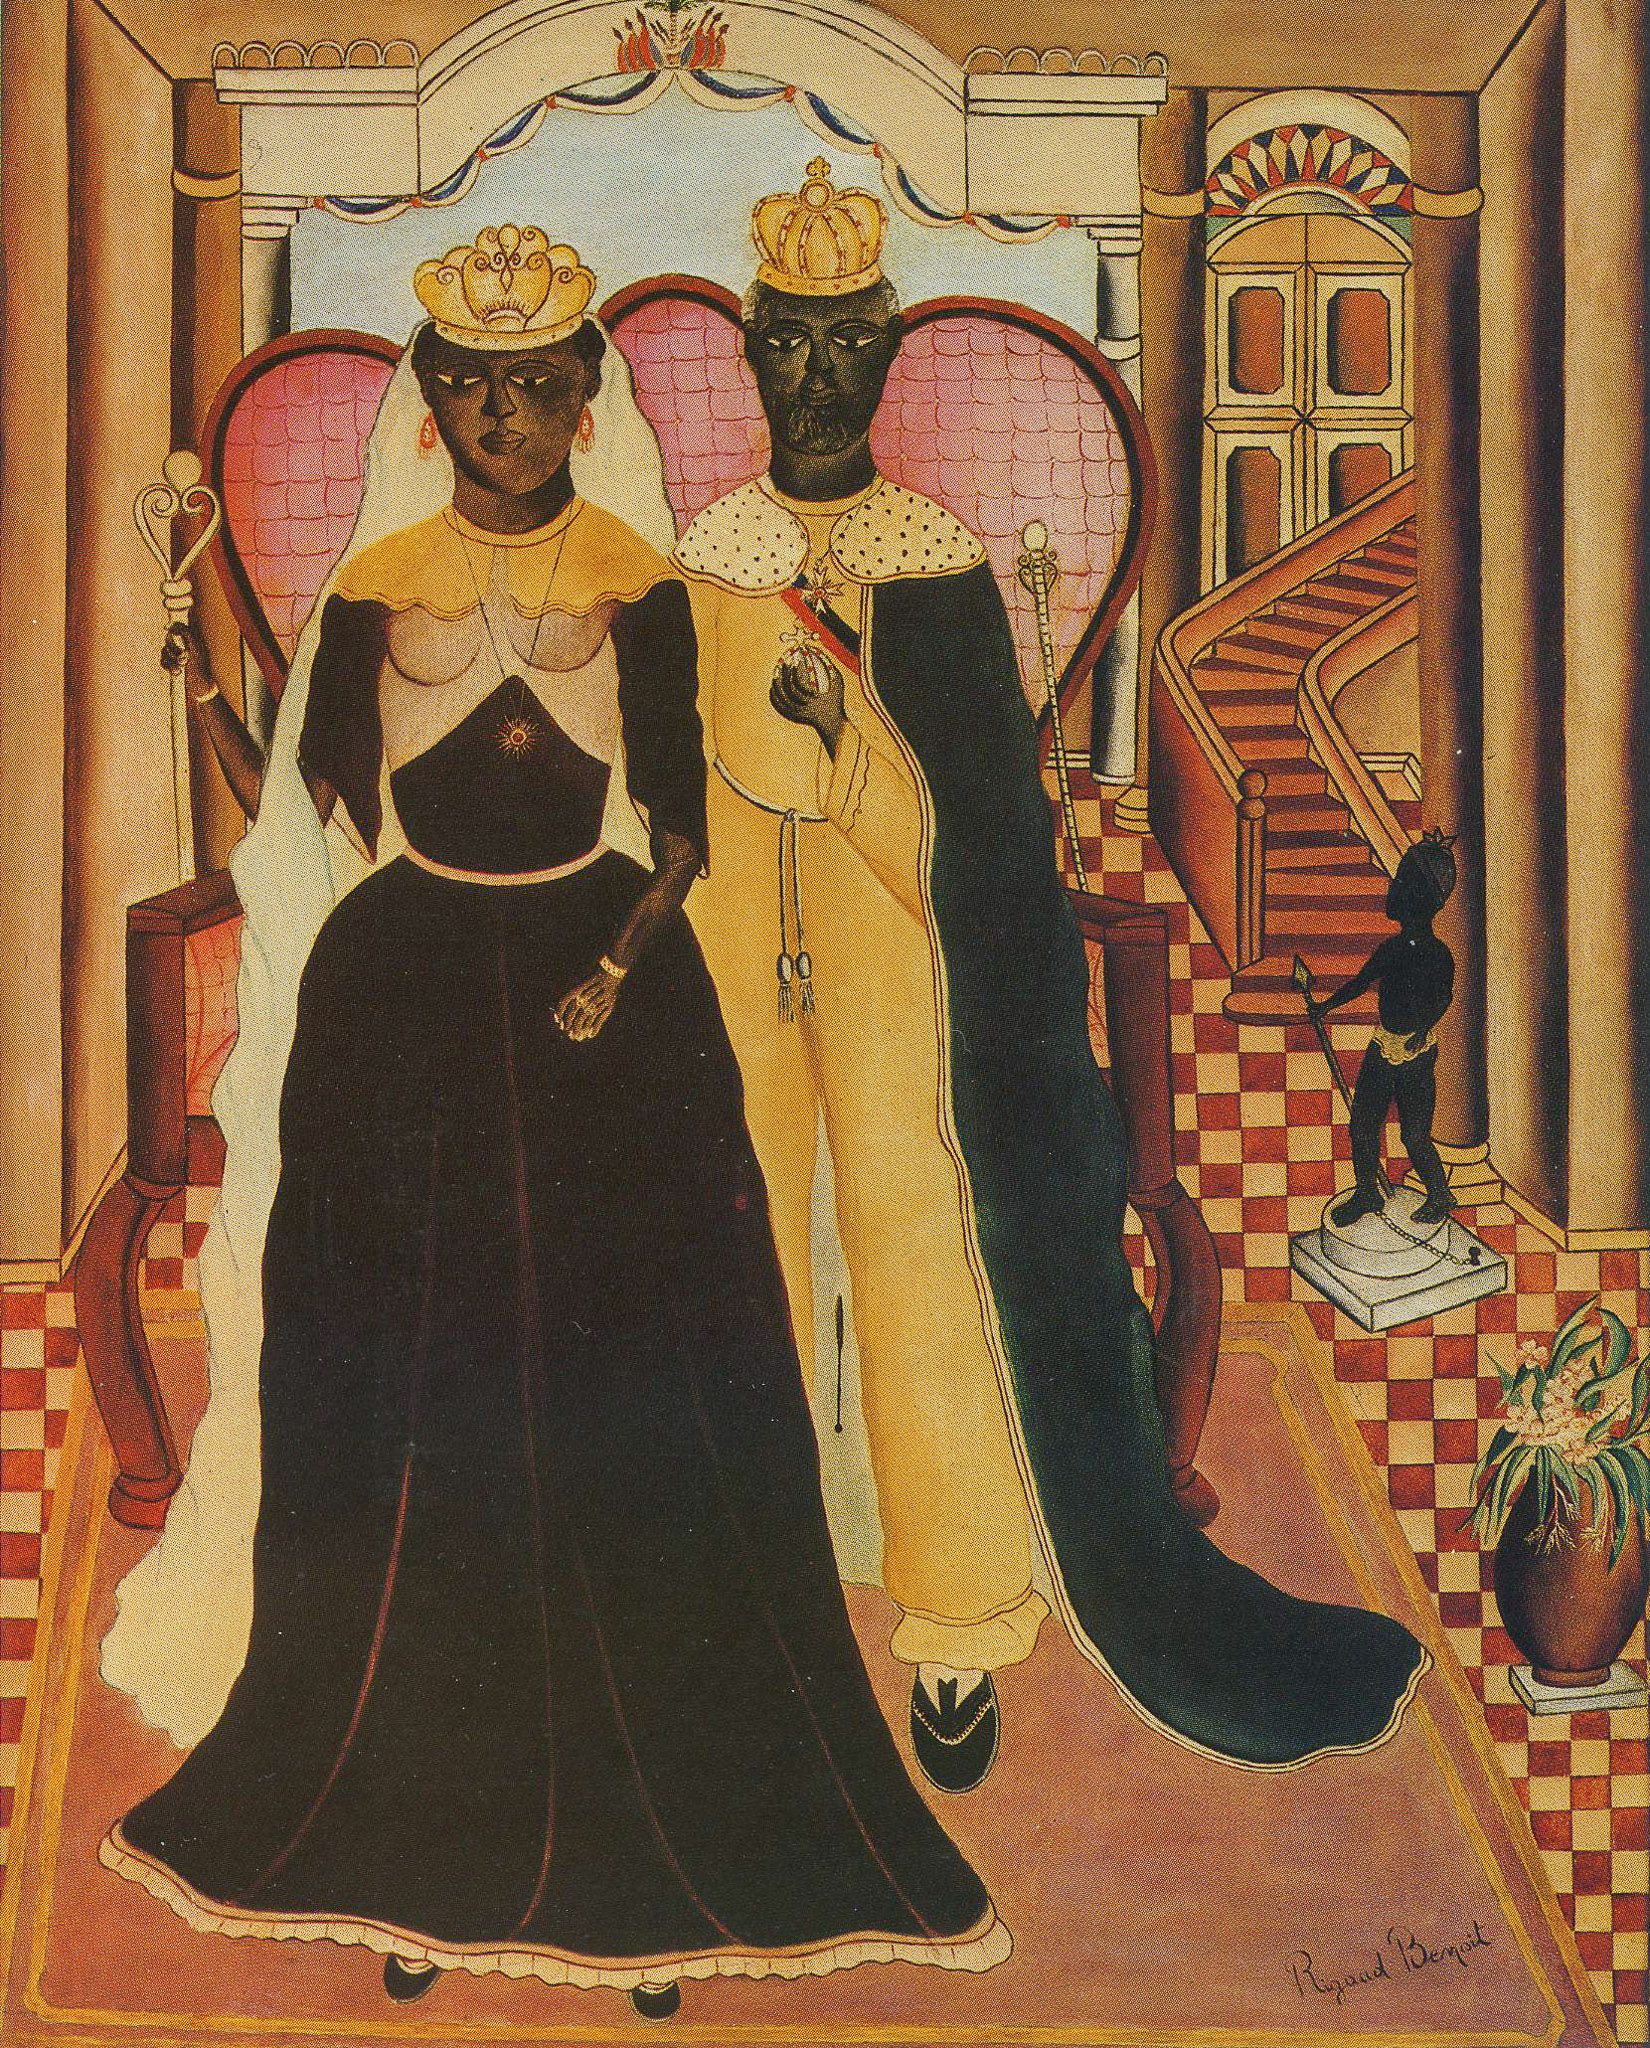 King and Queen, 1947